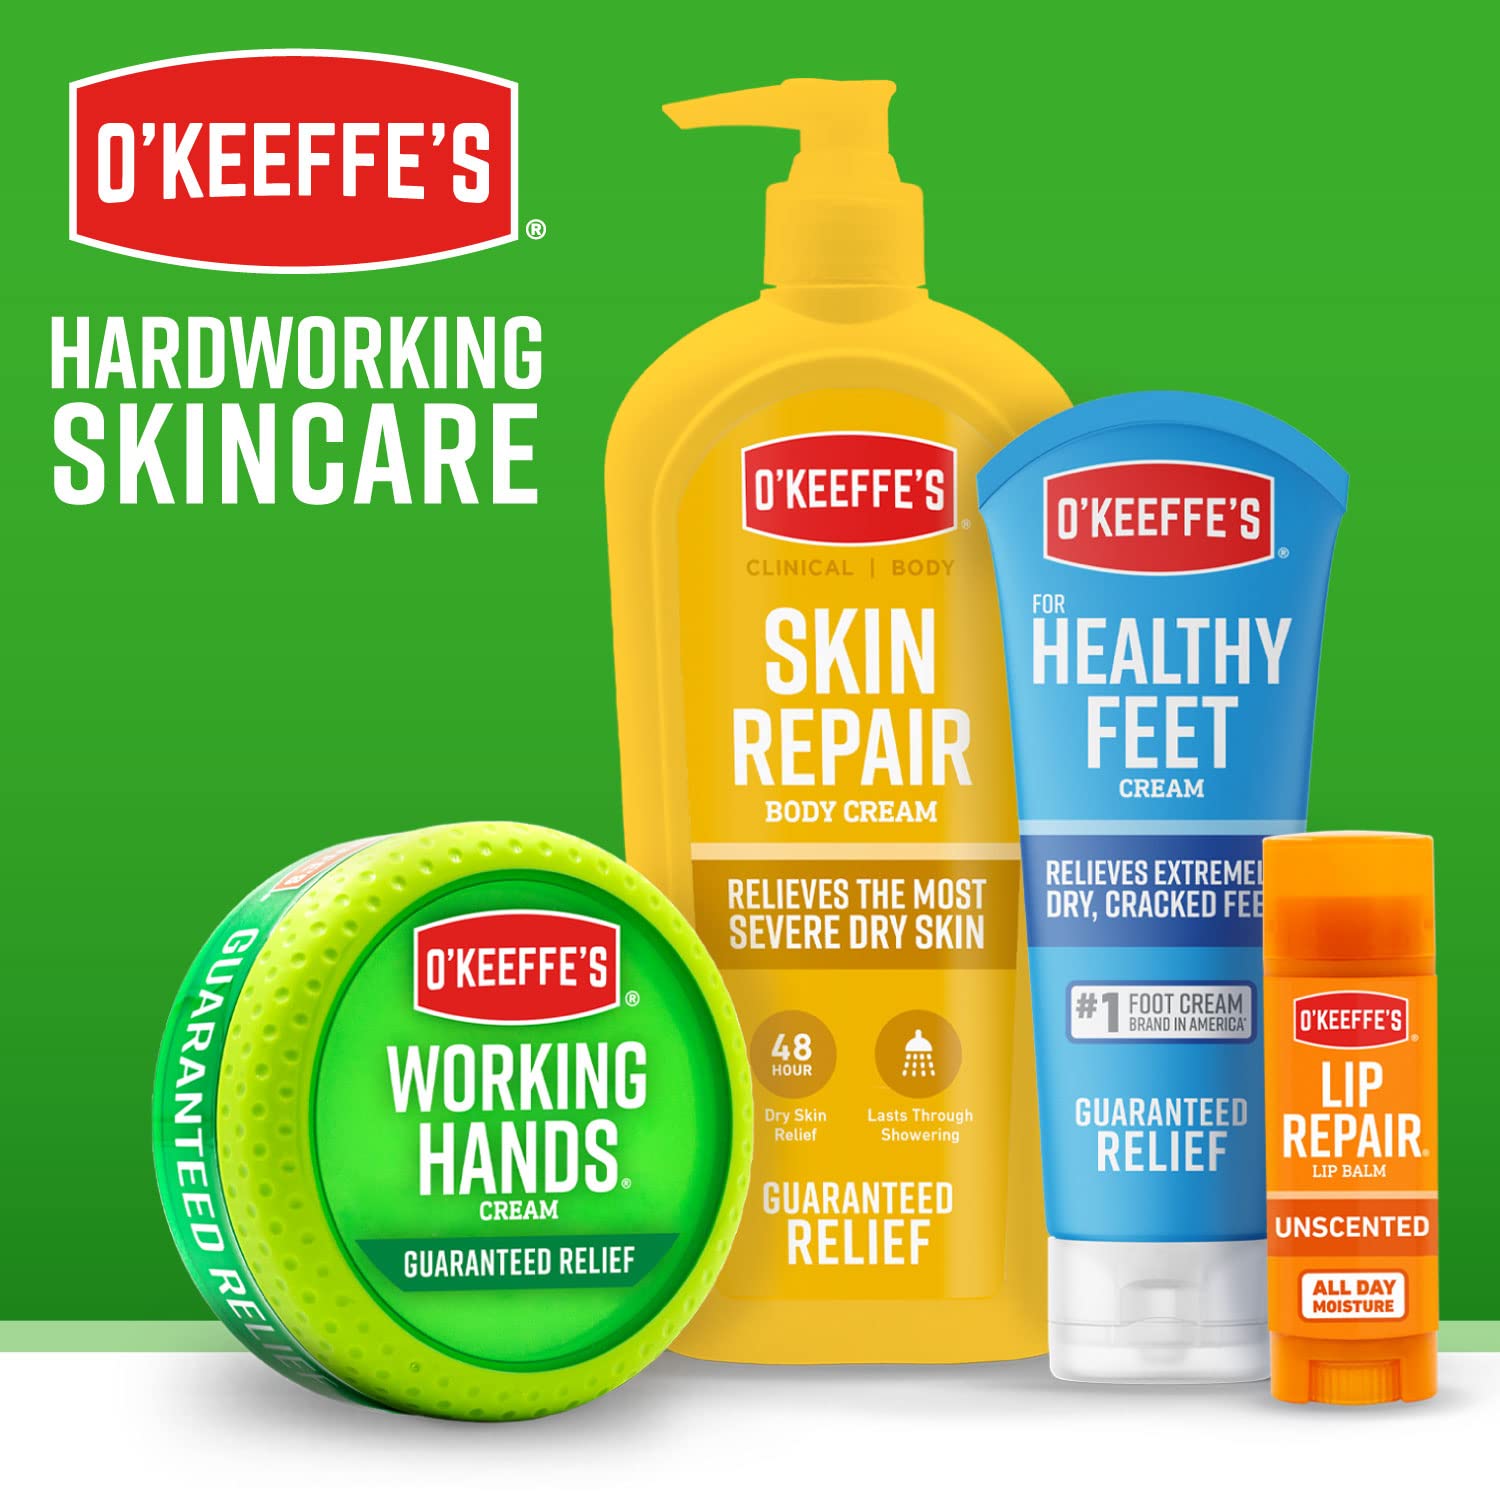 O'Keeffe's for Healthy Feet Exfoliating and Moisturizing Foot Cream, Guaranteed Relief for Extremely Dry, Cracked Feet, Softer Feet in 1 Use, 3.0 Ounce Tube, (Pack of 1)